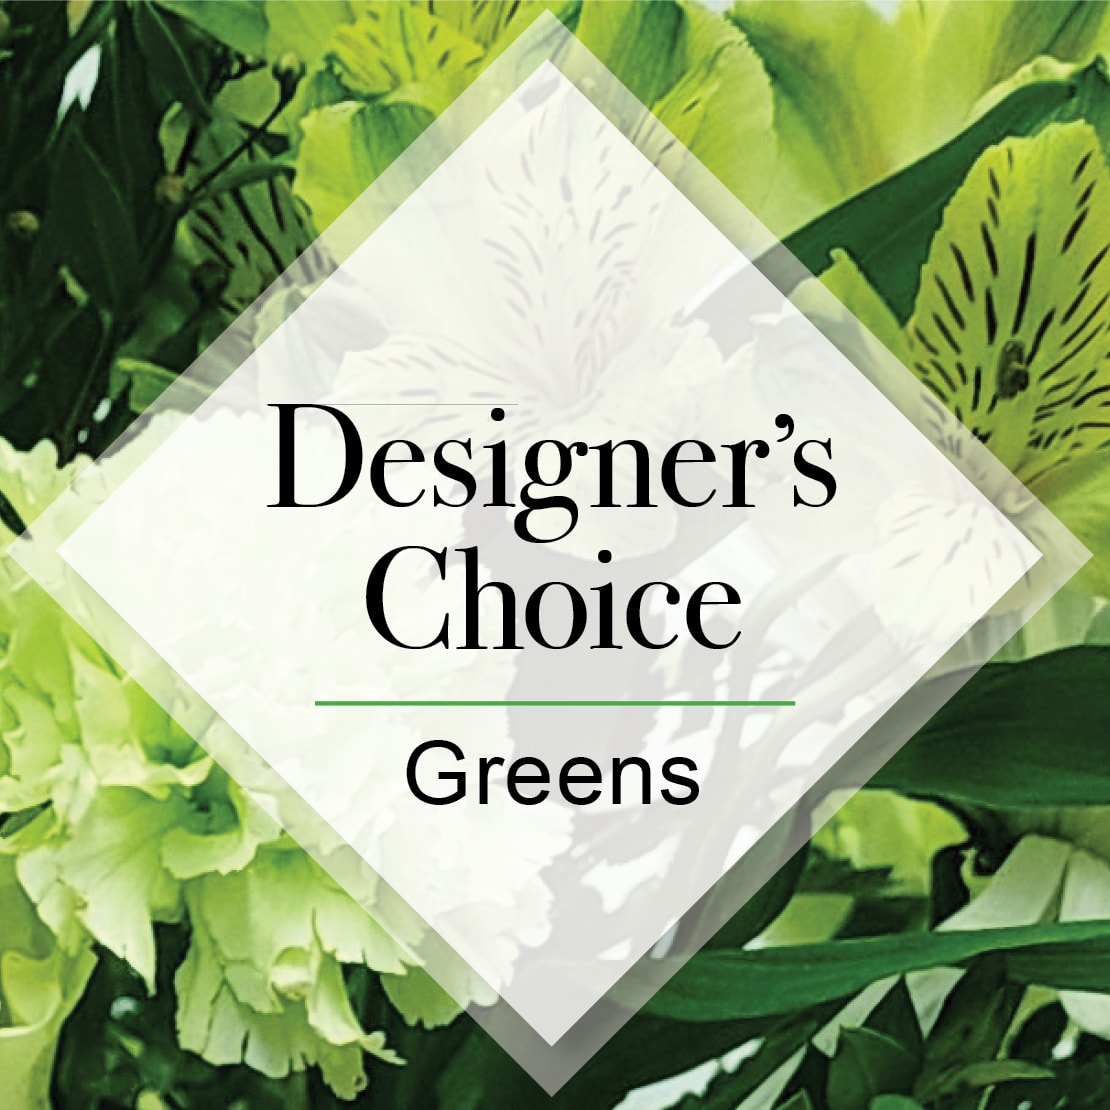 Designers Choice Greens - A selection that will be predominately the color that you have chosen with accents and greenery to compliment. The designers have the flexibility to create something unique and beautiful for you and is often the best value for you. If you have specifics you would like to request please include in the comments / special instructions area when placing your order.